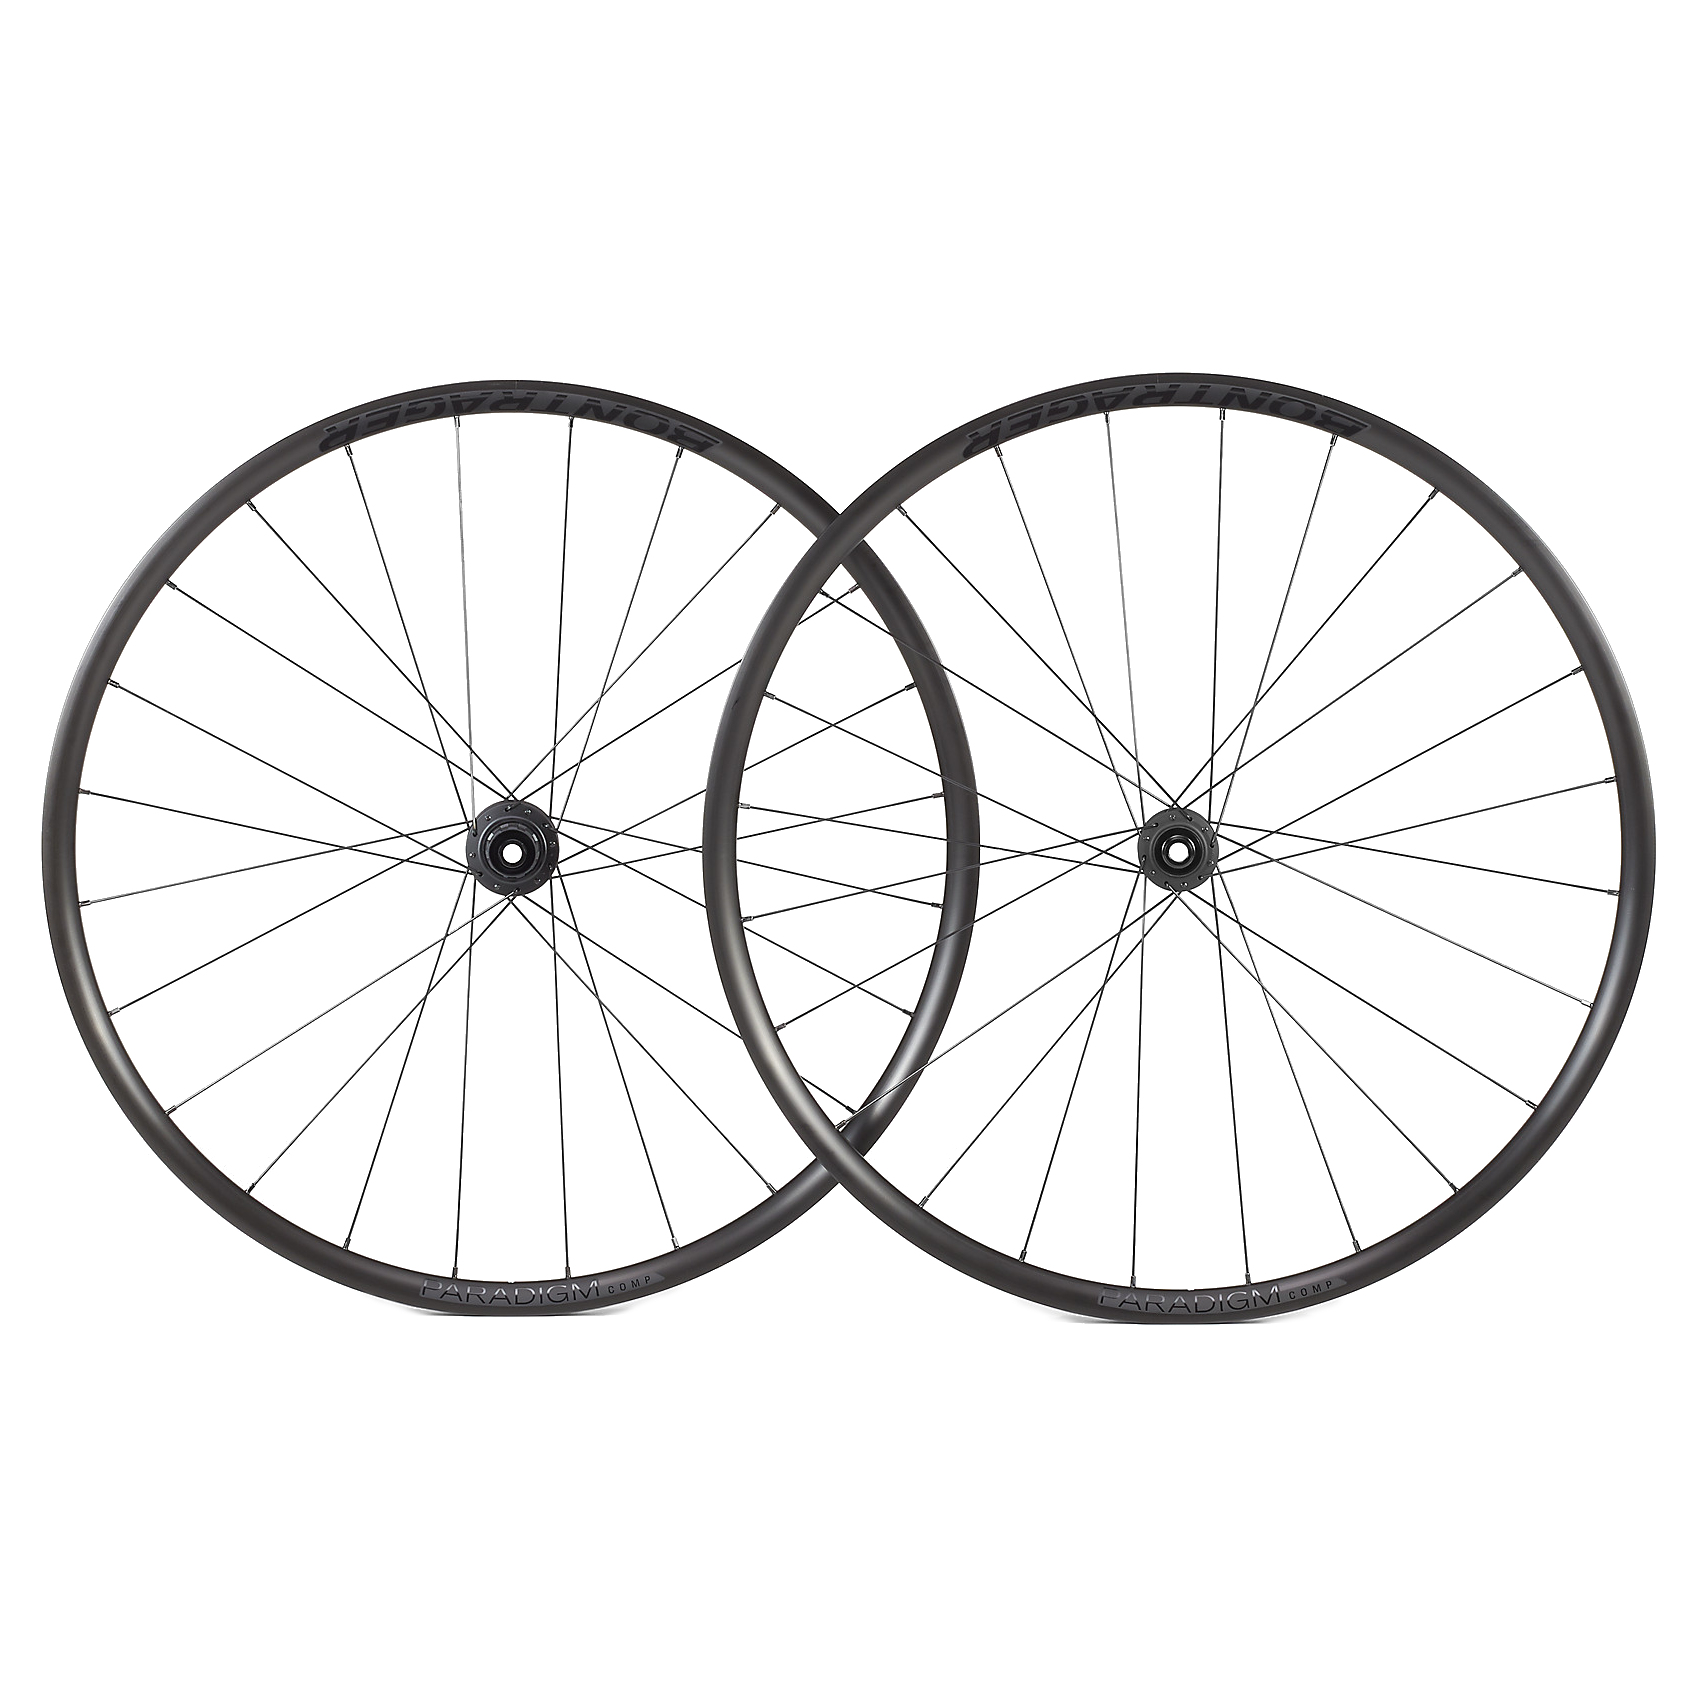 Picture of Bontrager Paradigm Comp TLR Disc Wheelset - Clincher / Tubeless - Centerlock - 12x100mm | 12x142mm - Shimano HG